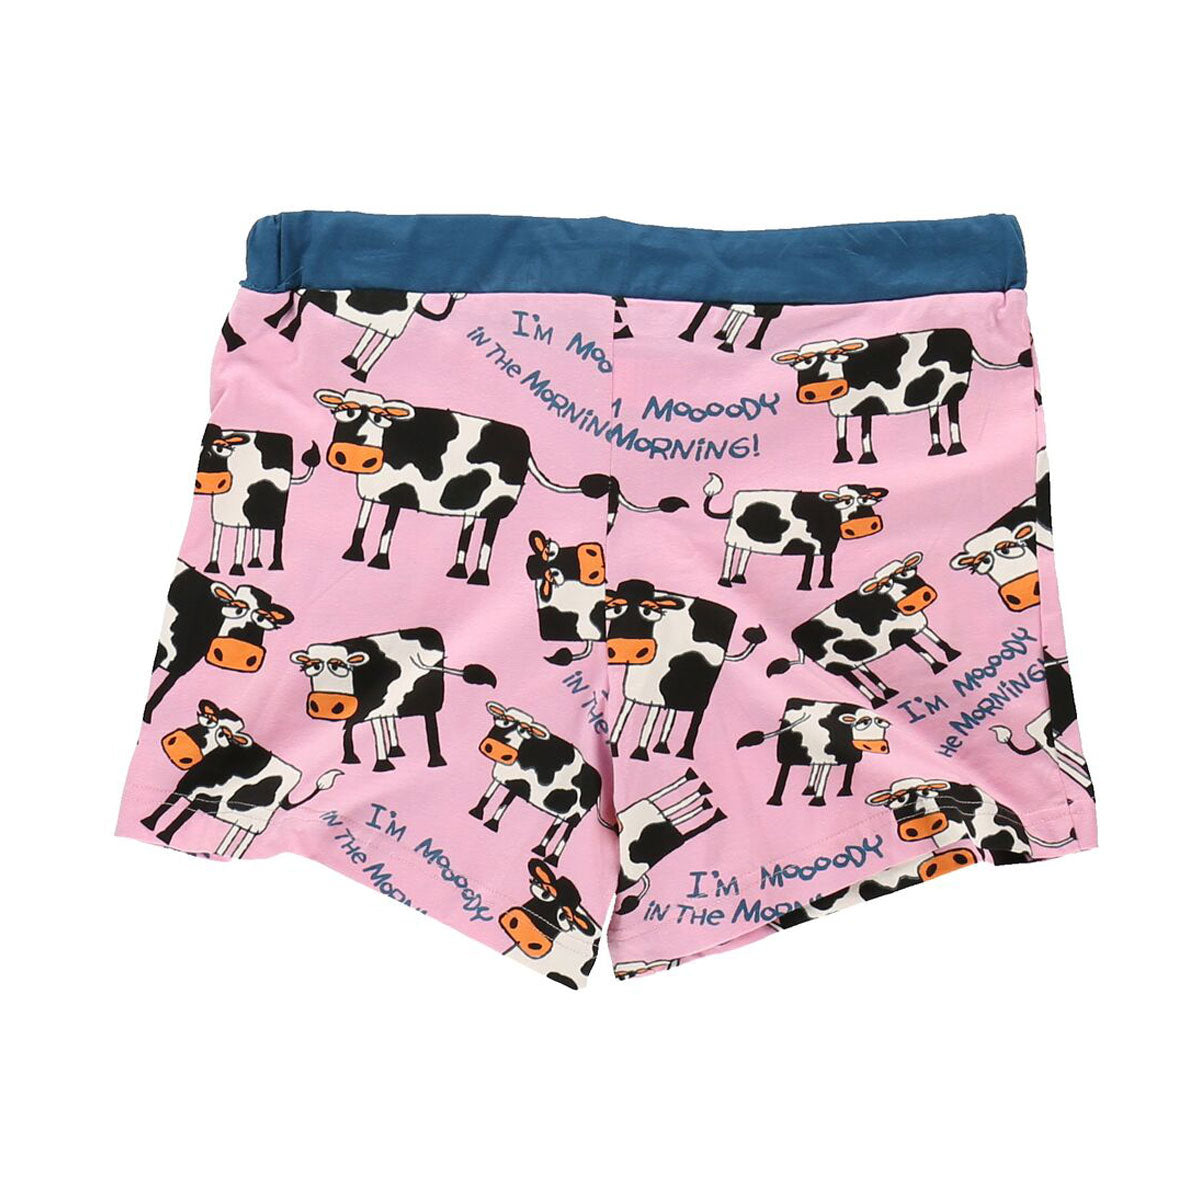 LazyOne Mooody in the Morning PJ Boxer pour femme 